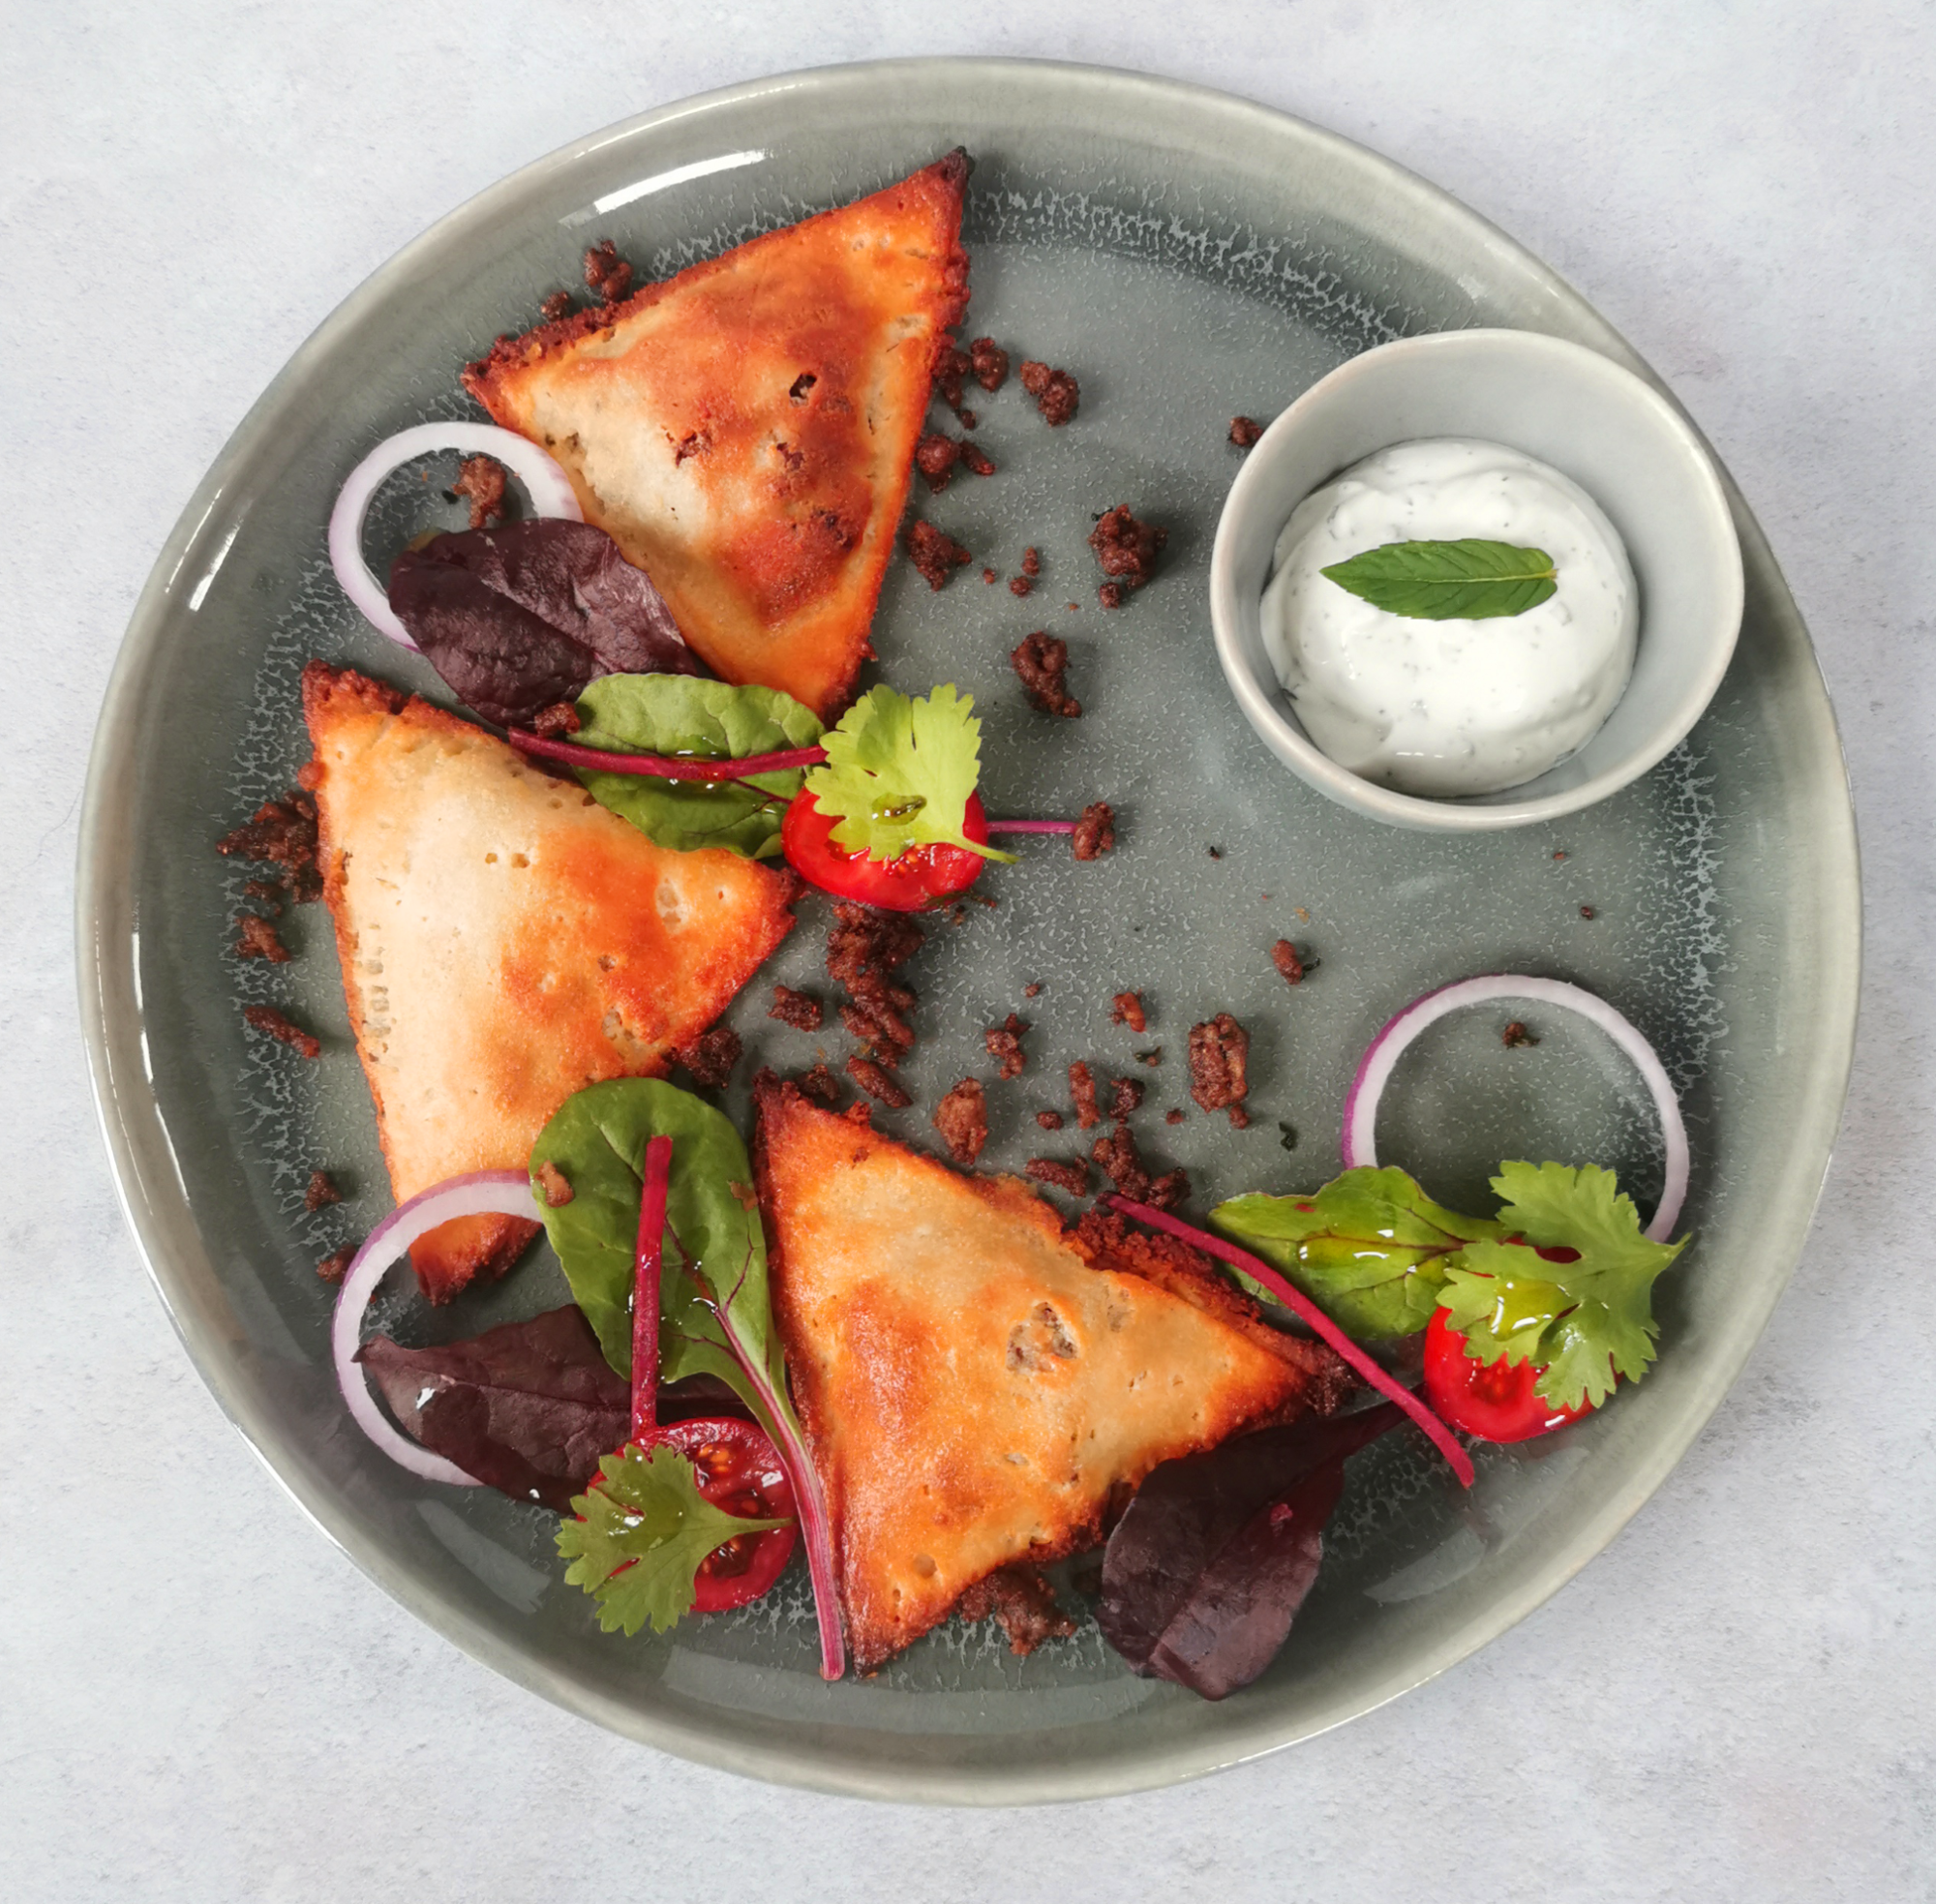 grey plate on a white background with 3 lamb samosas, a bowl of mint yoghurt and salad garnish